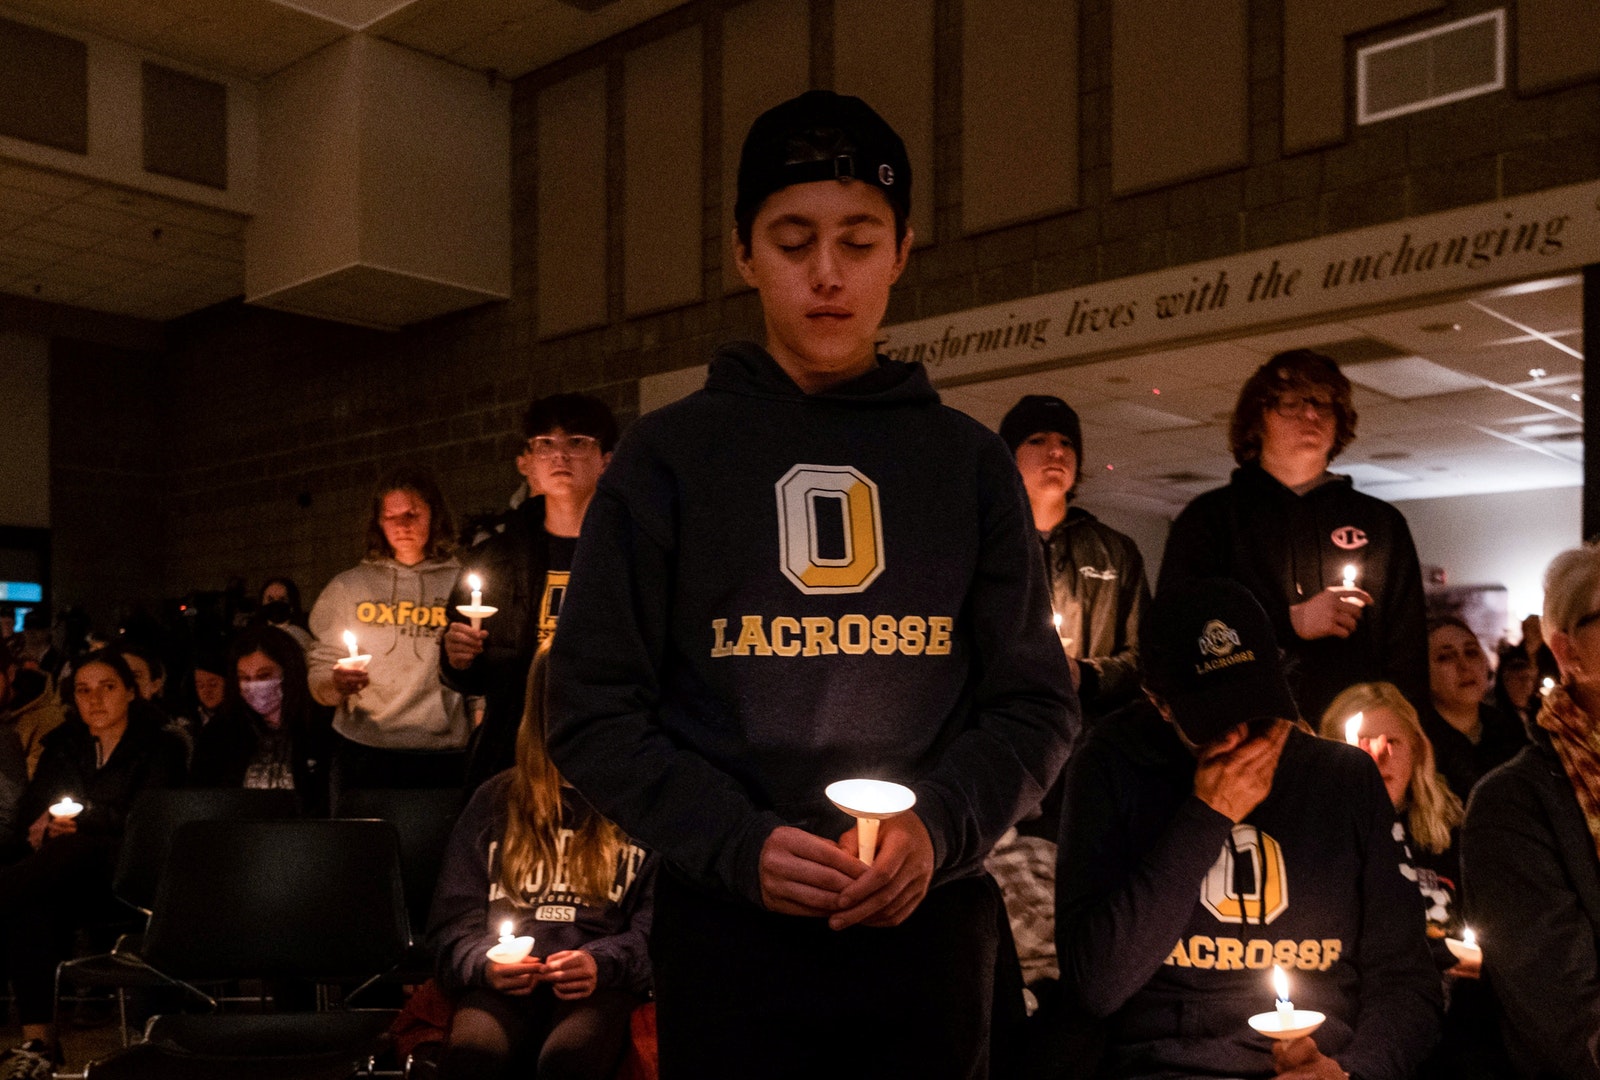 High school students stand during a prayer vigil at Lake Point Community Church in Oxford, Mich., Nov. 30, 2021. A 15-year-old student opened fire at his high school in Oxford, killing three students and wounding eight others. The suspect, who was not named, was taken into custody without incident, police said. (CNS photo/Seth Herald, Reuters)